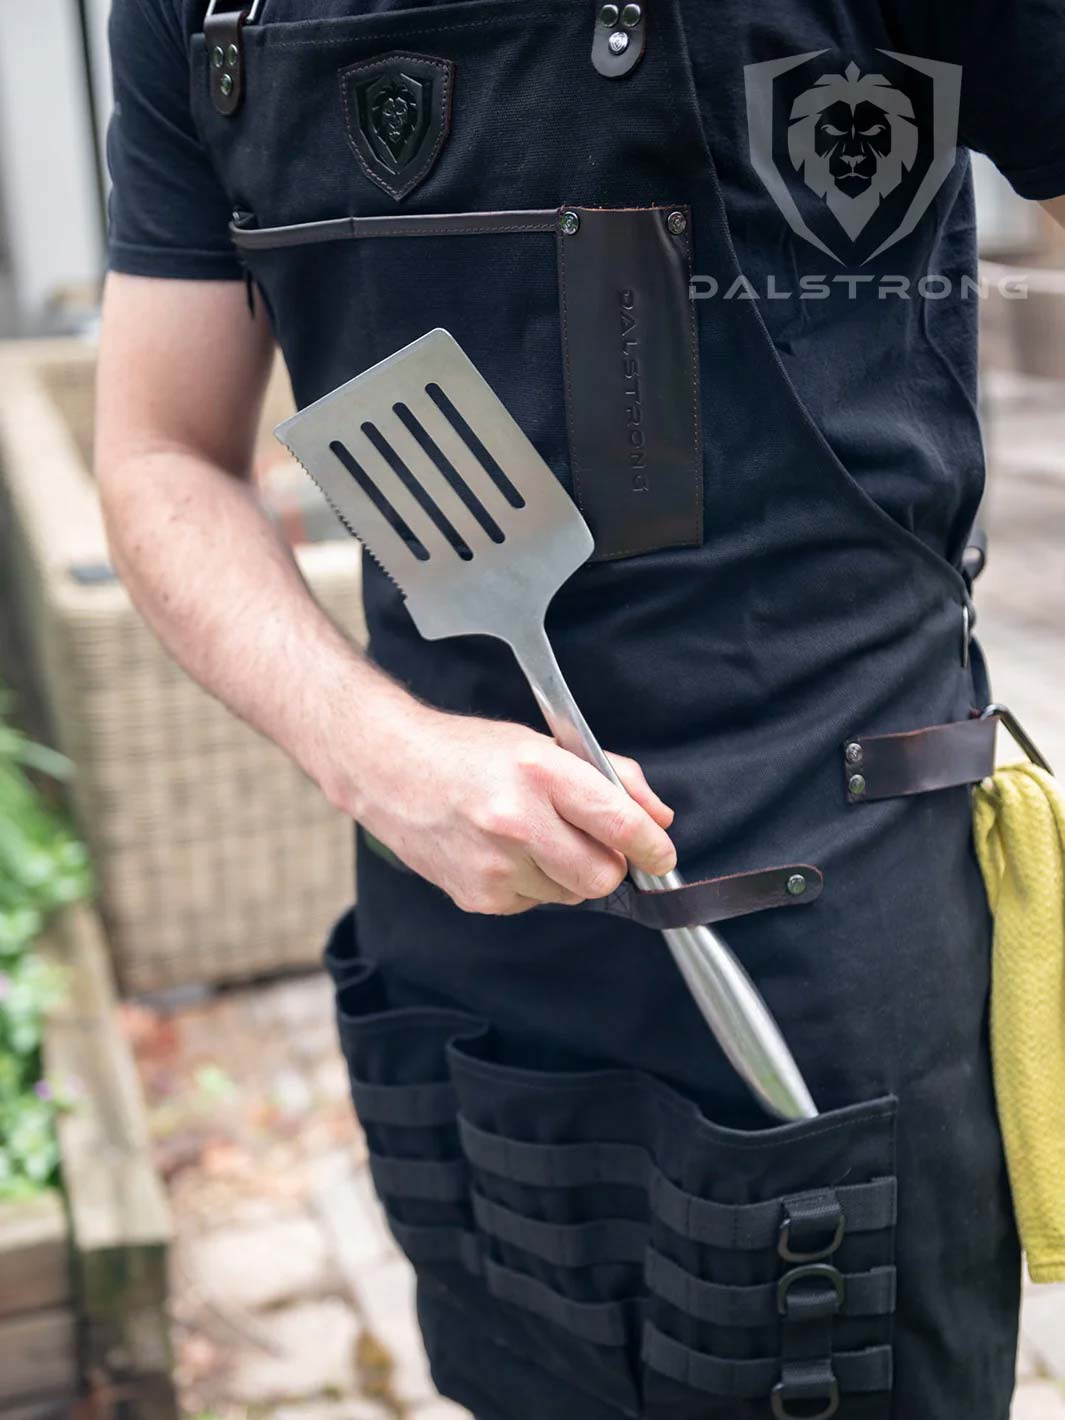 Dalstrong heavy-duty waxed canvas bbq apron beside a spatula.